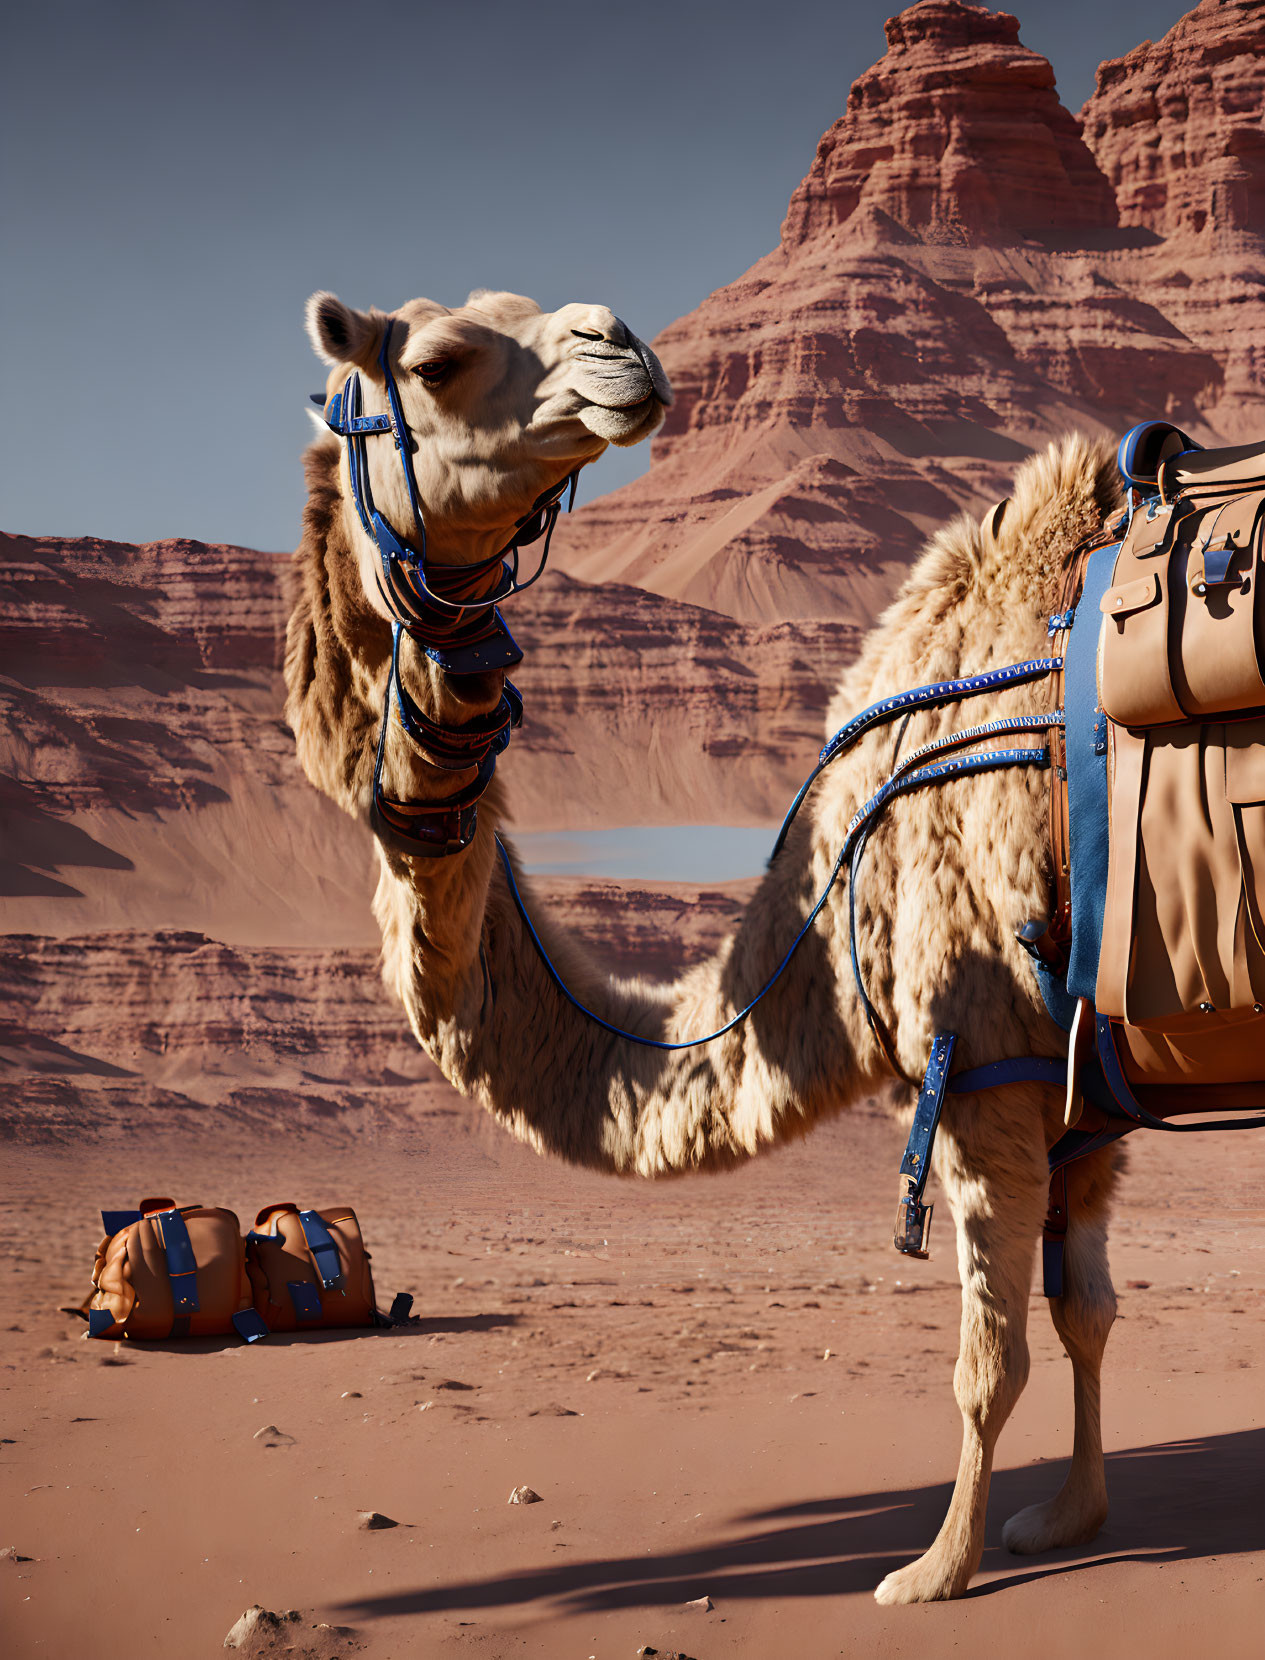 Camel with saddle in sandy desert with rocky formations and blue sky